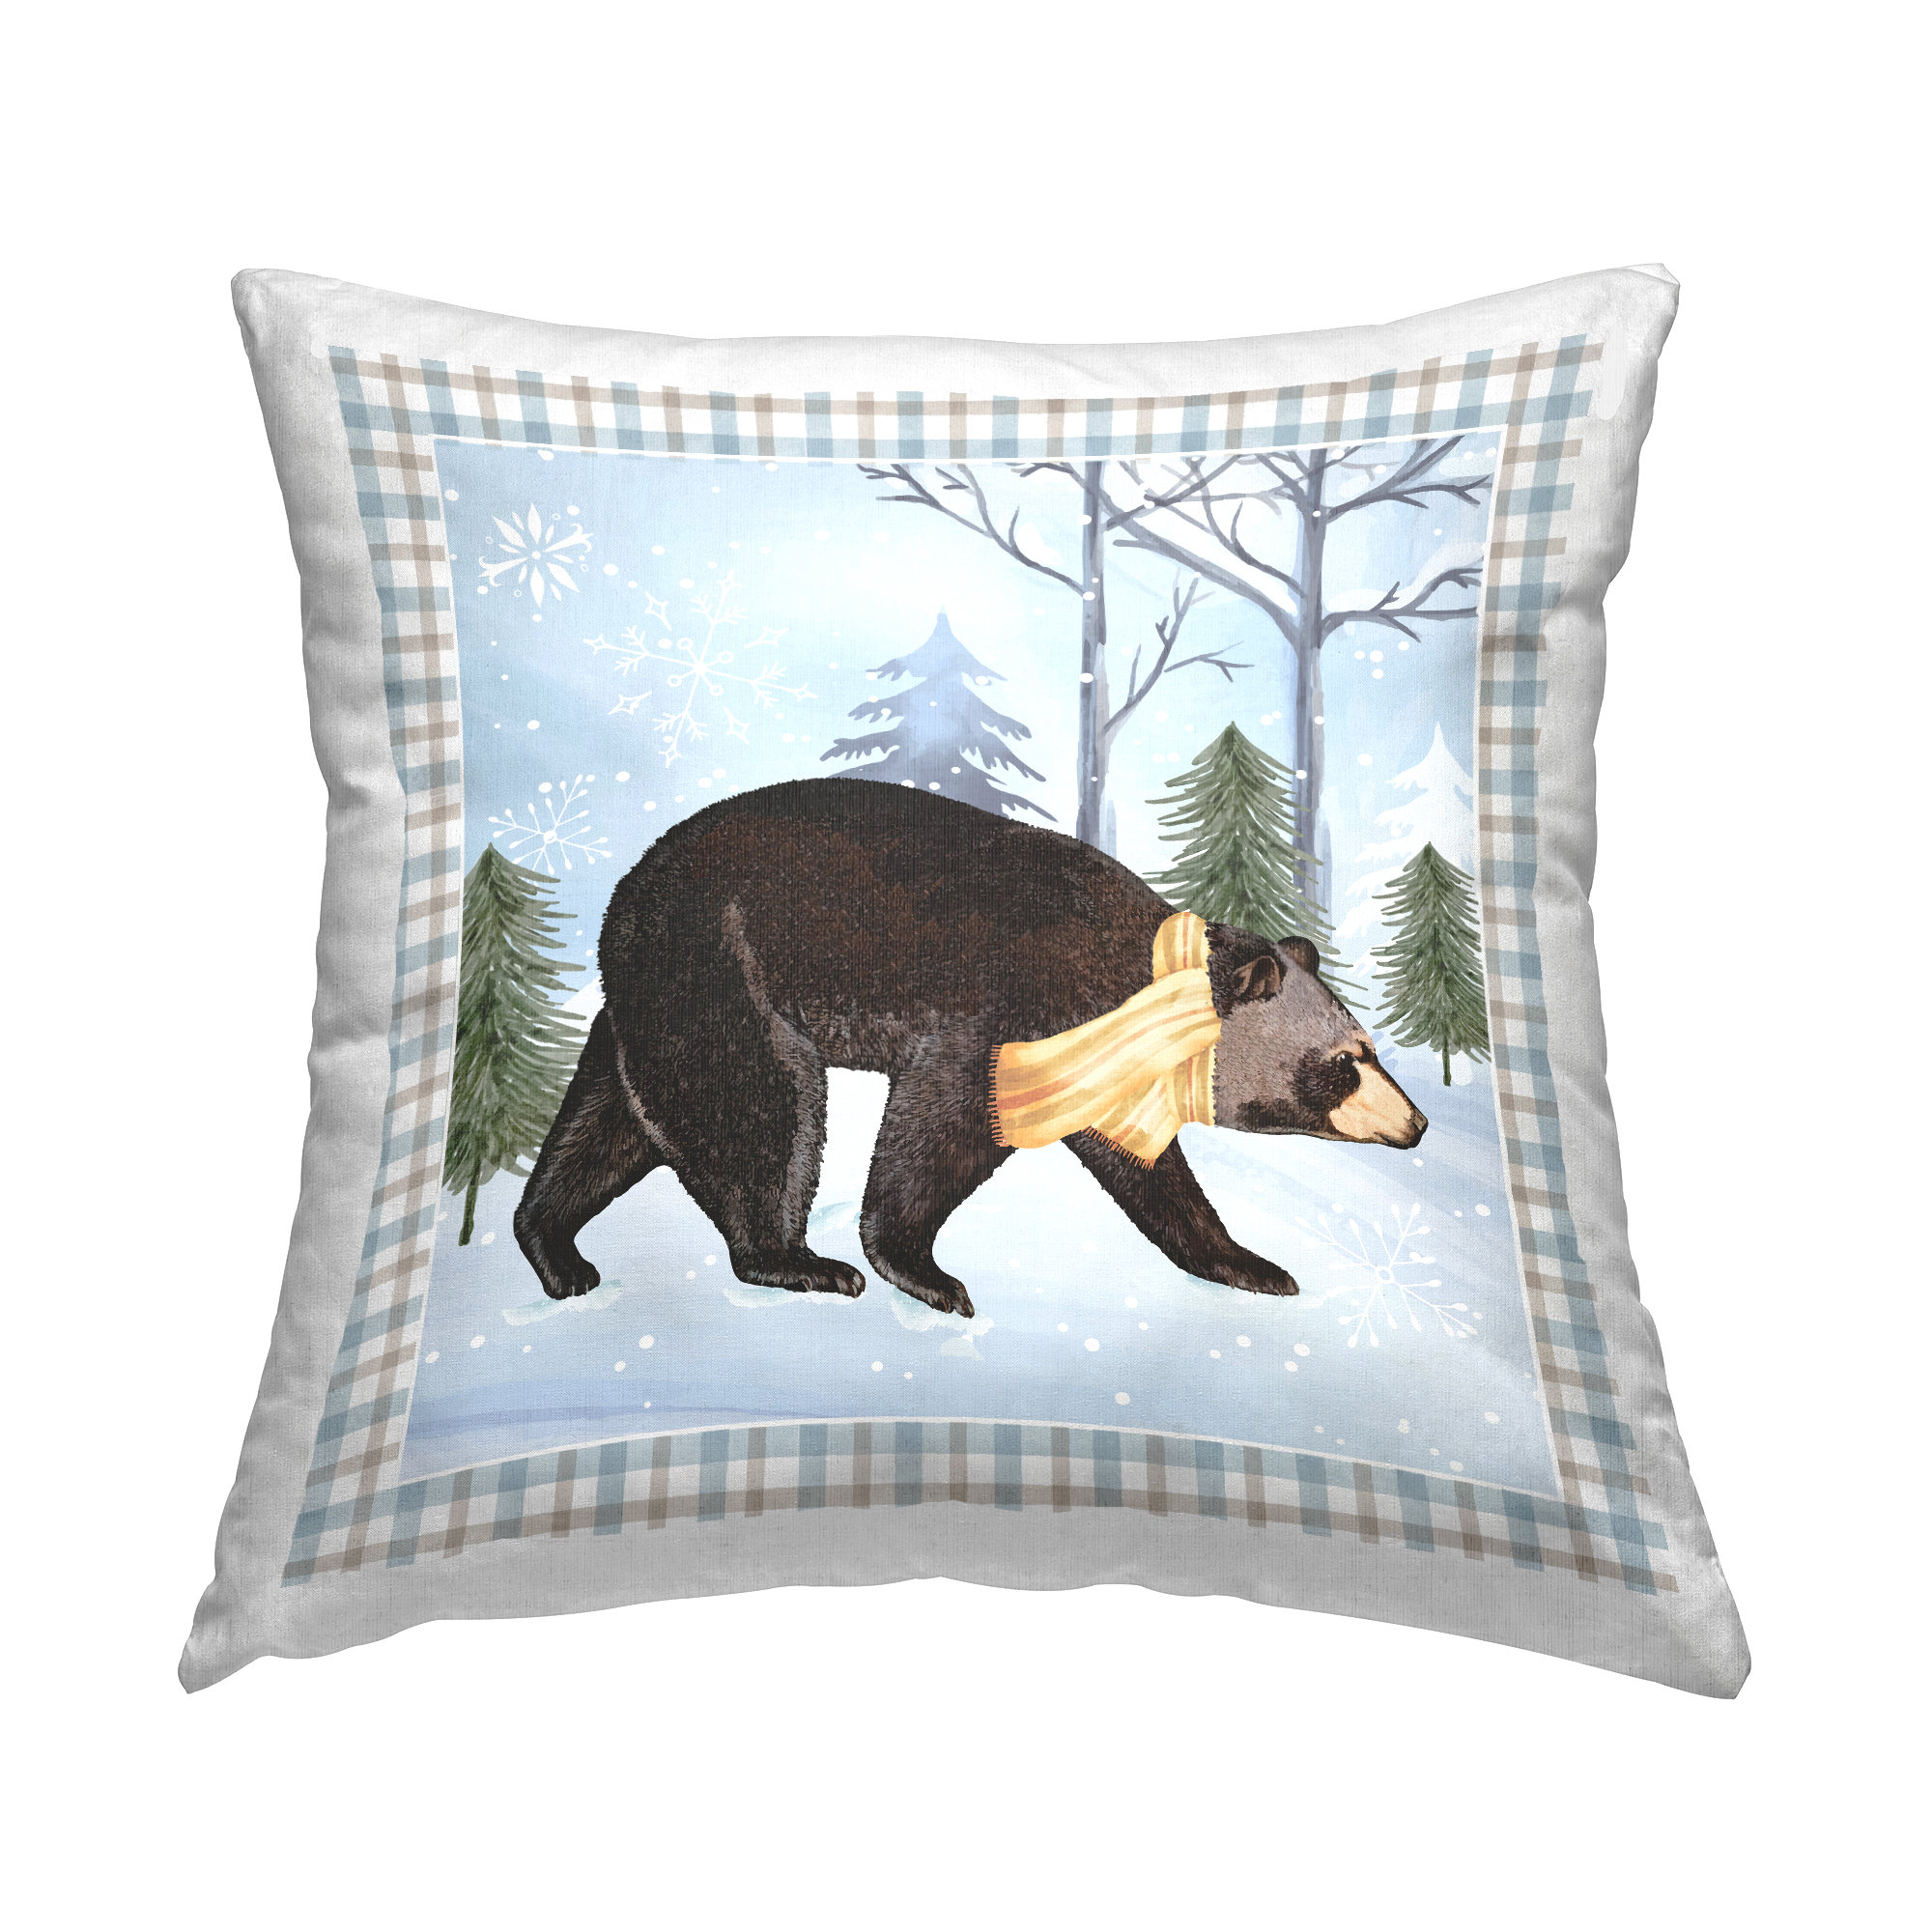 Stupell Industries No Decorative Addition Polyester Throw Pillow & Reviews